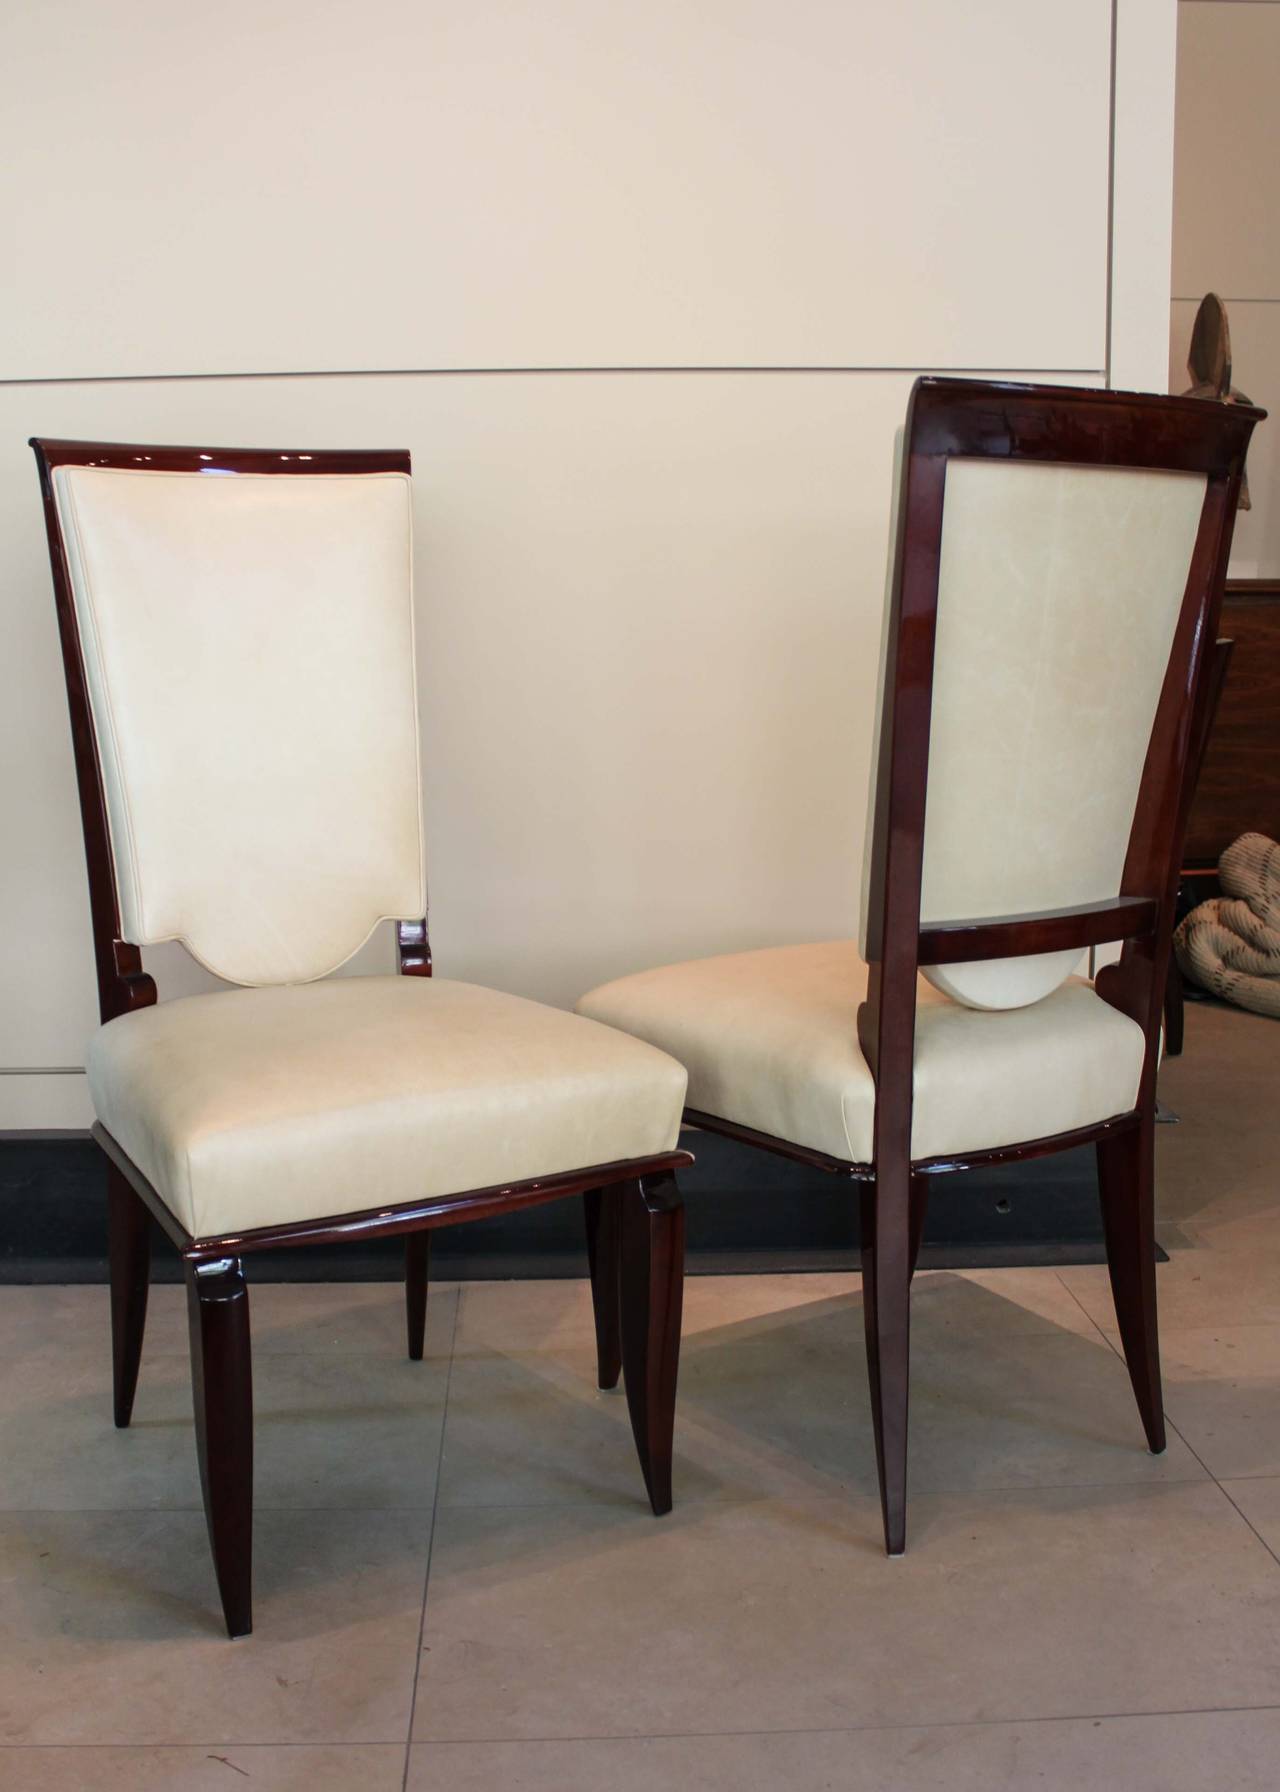 Set of six upholstered high back chairs covered in cream leather, restored and polished circa 2000.
